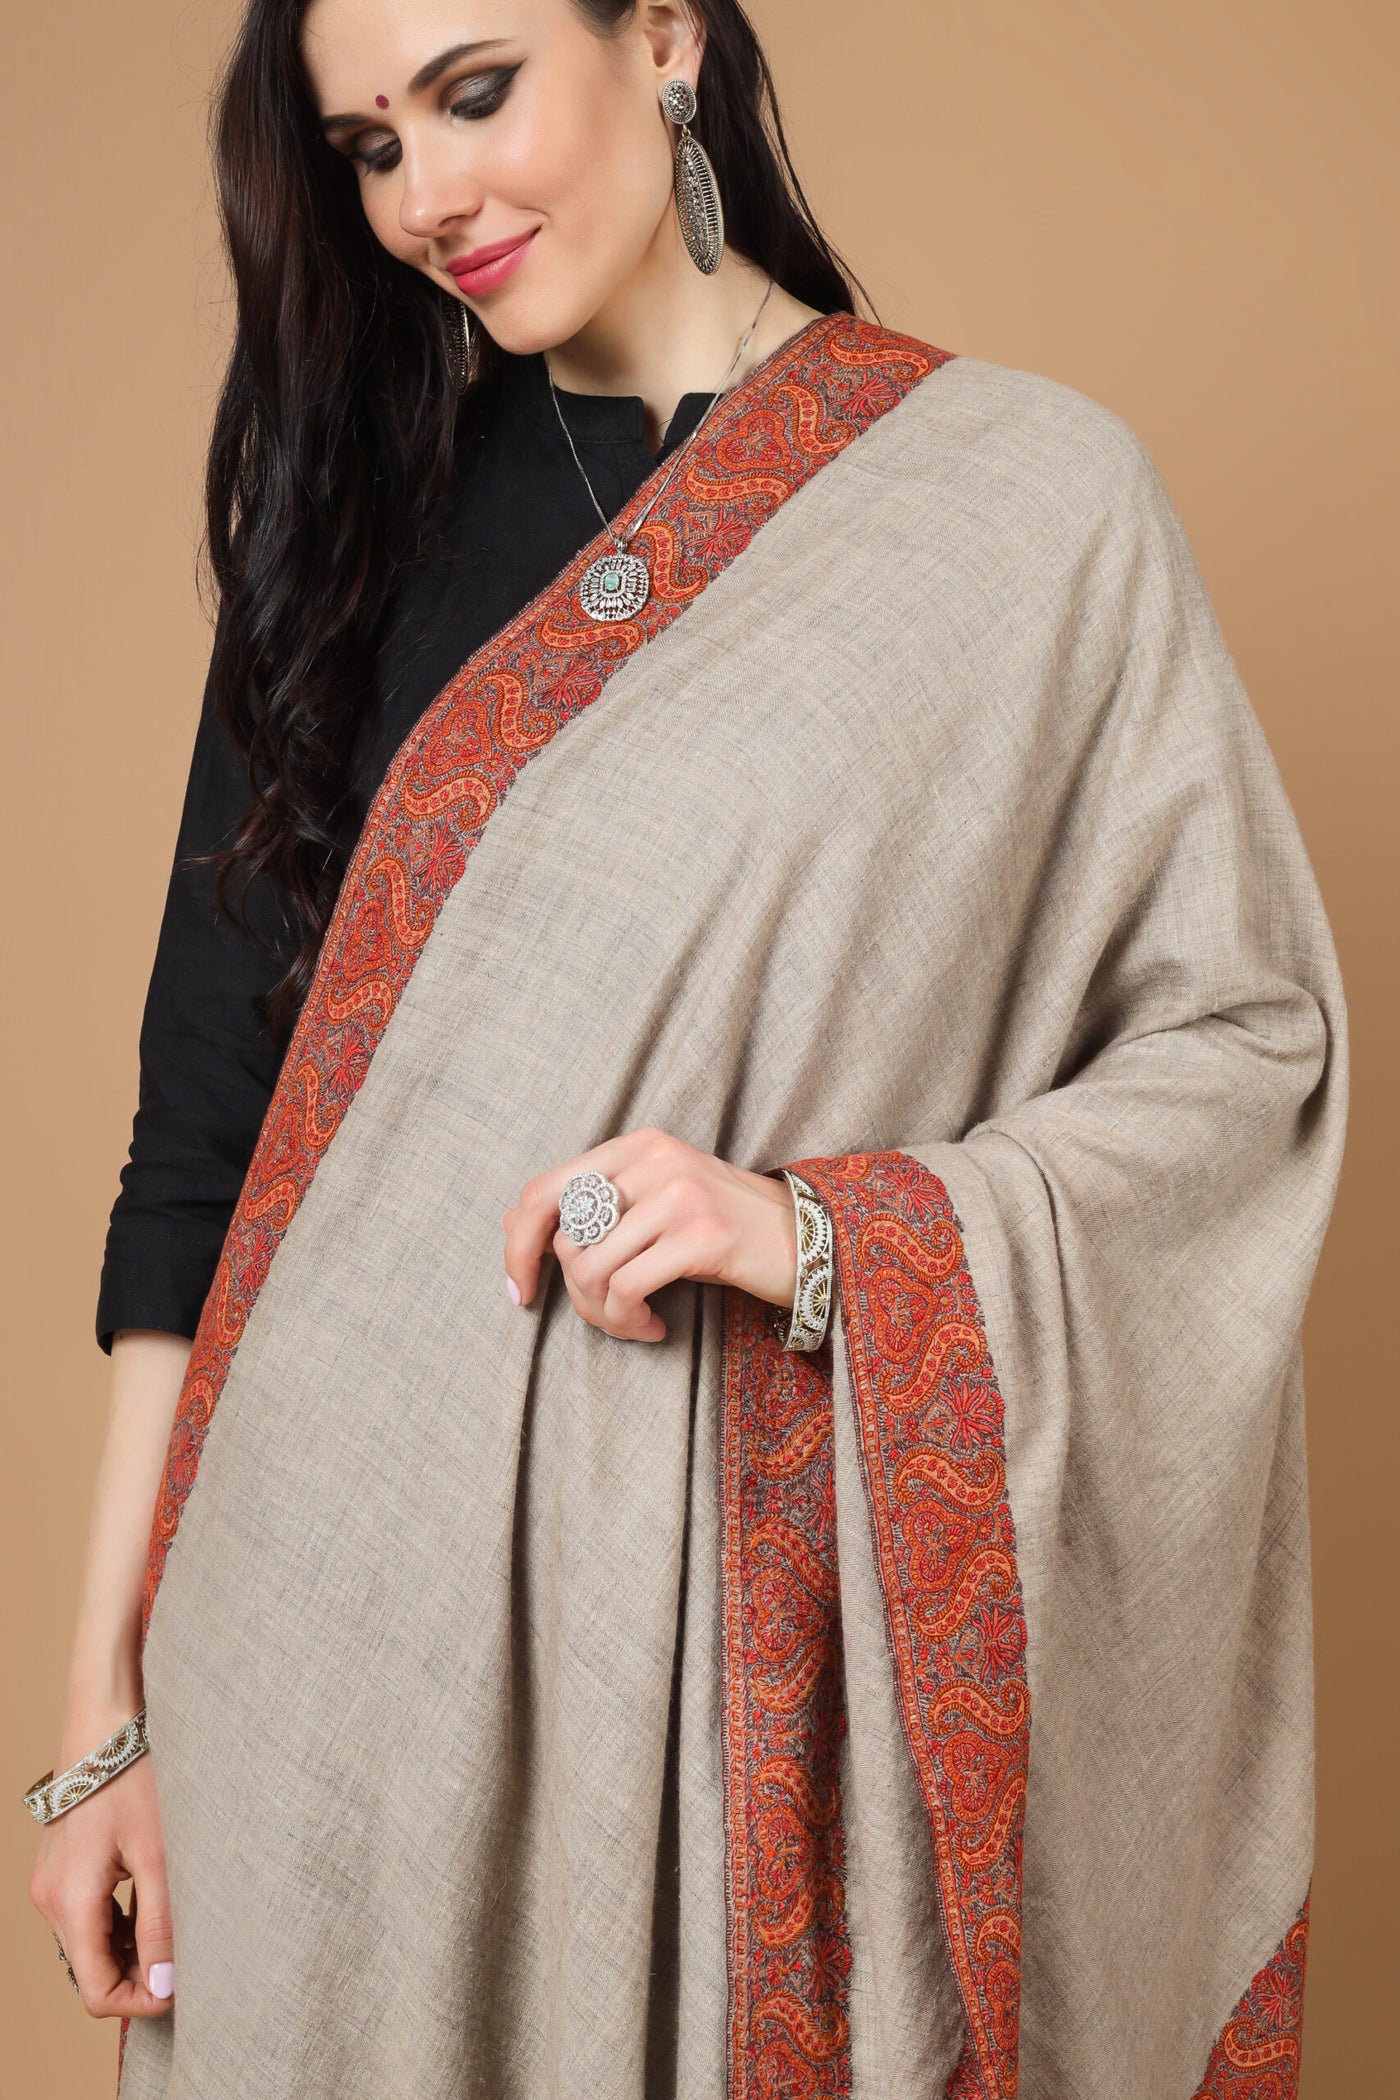  Wrap yourself in luxury with this handmade Kashmiri khud -rang natural color pashmina border shawl, crafted from the finest pashmina wool .